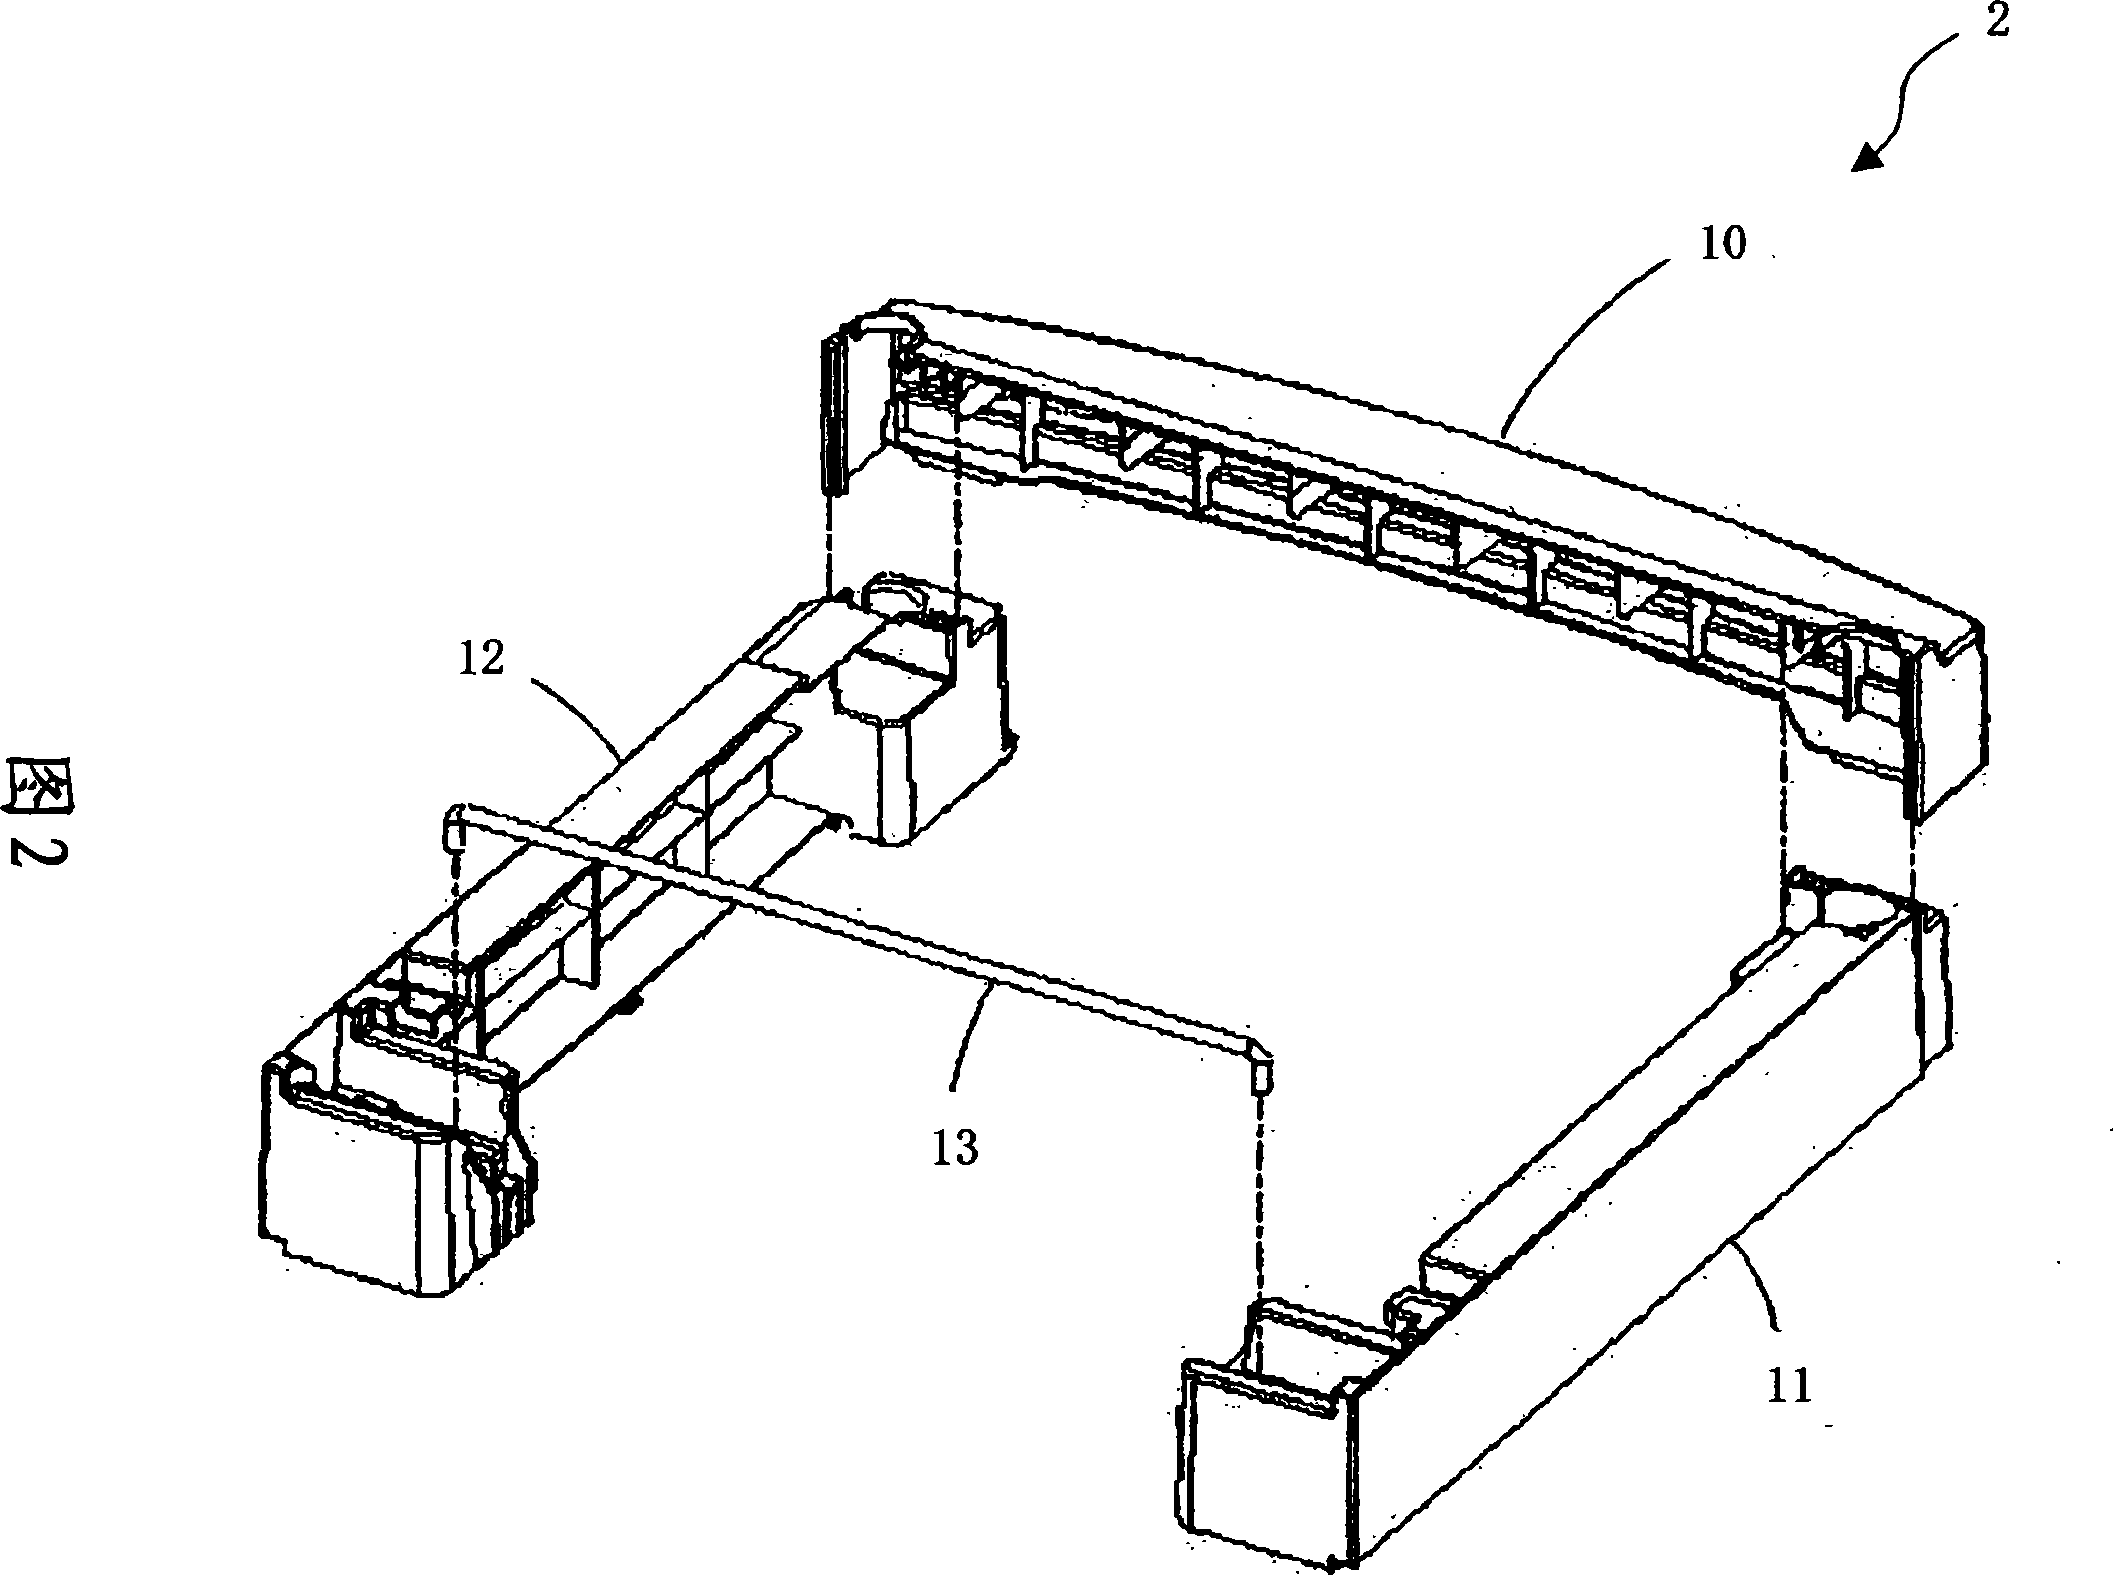 Support frame for a refrigerator